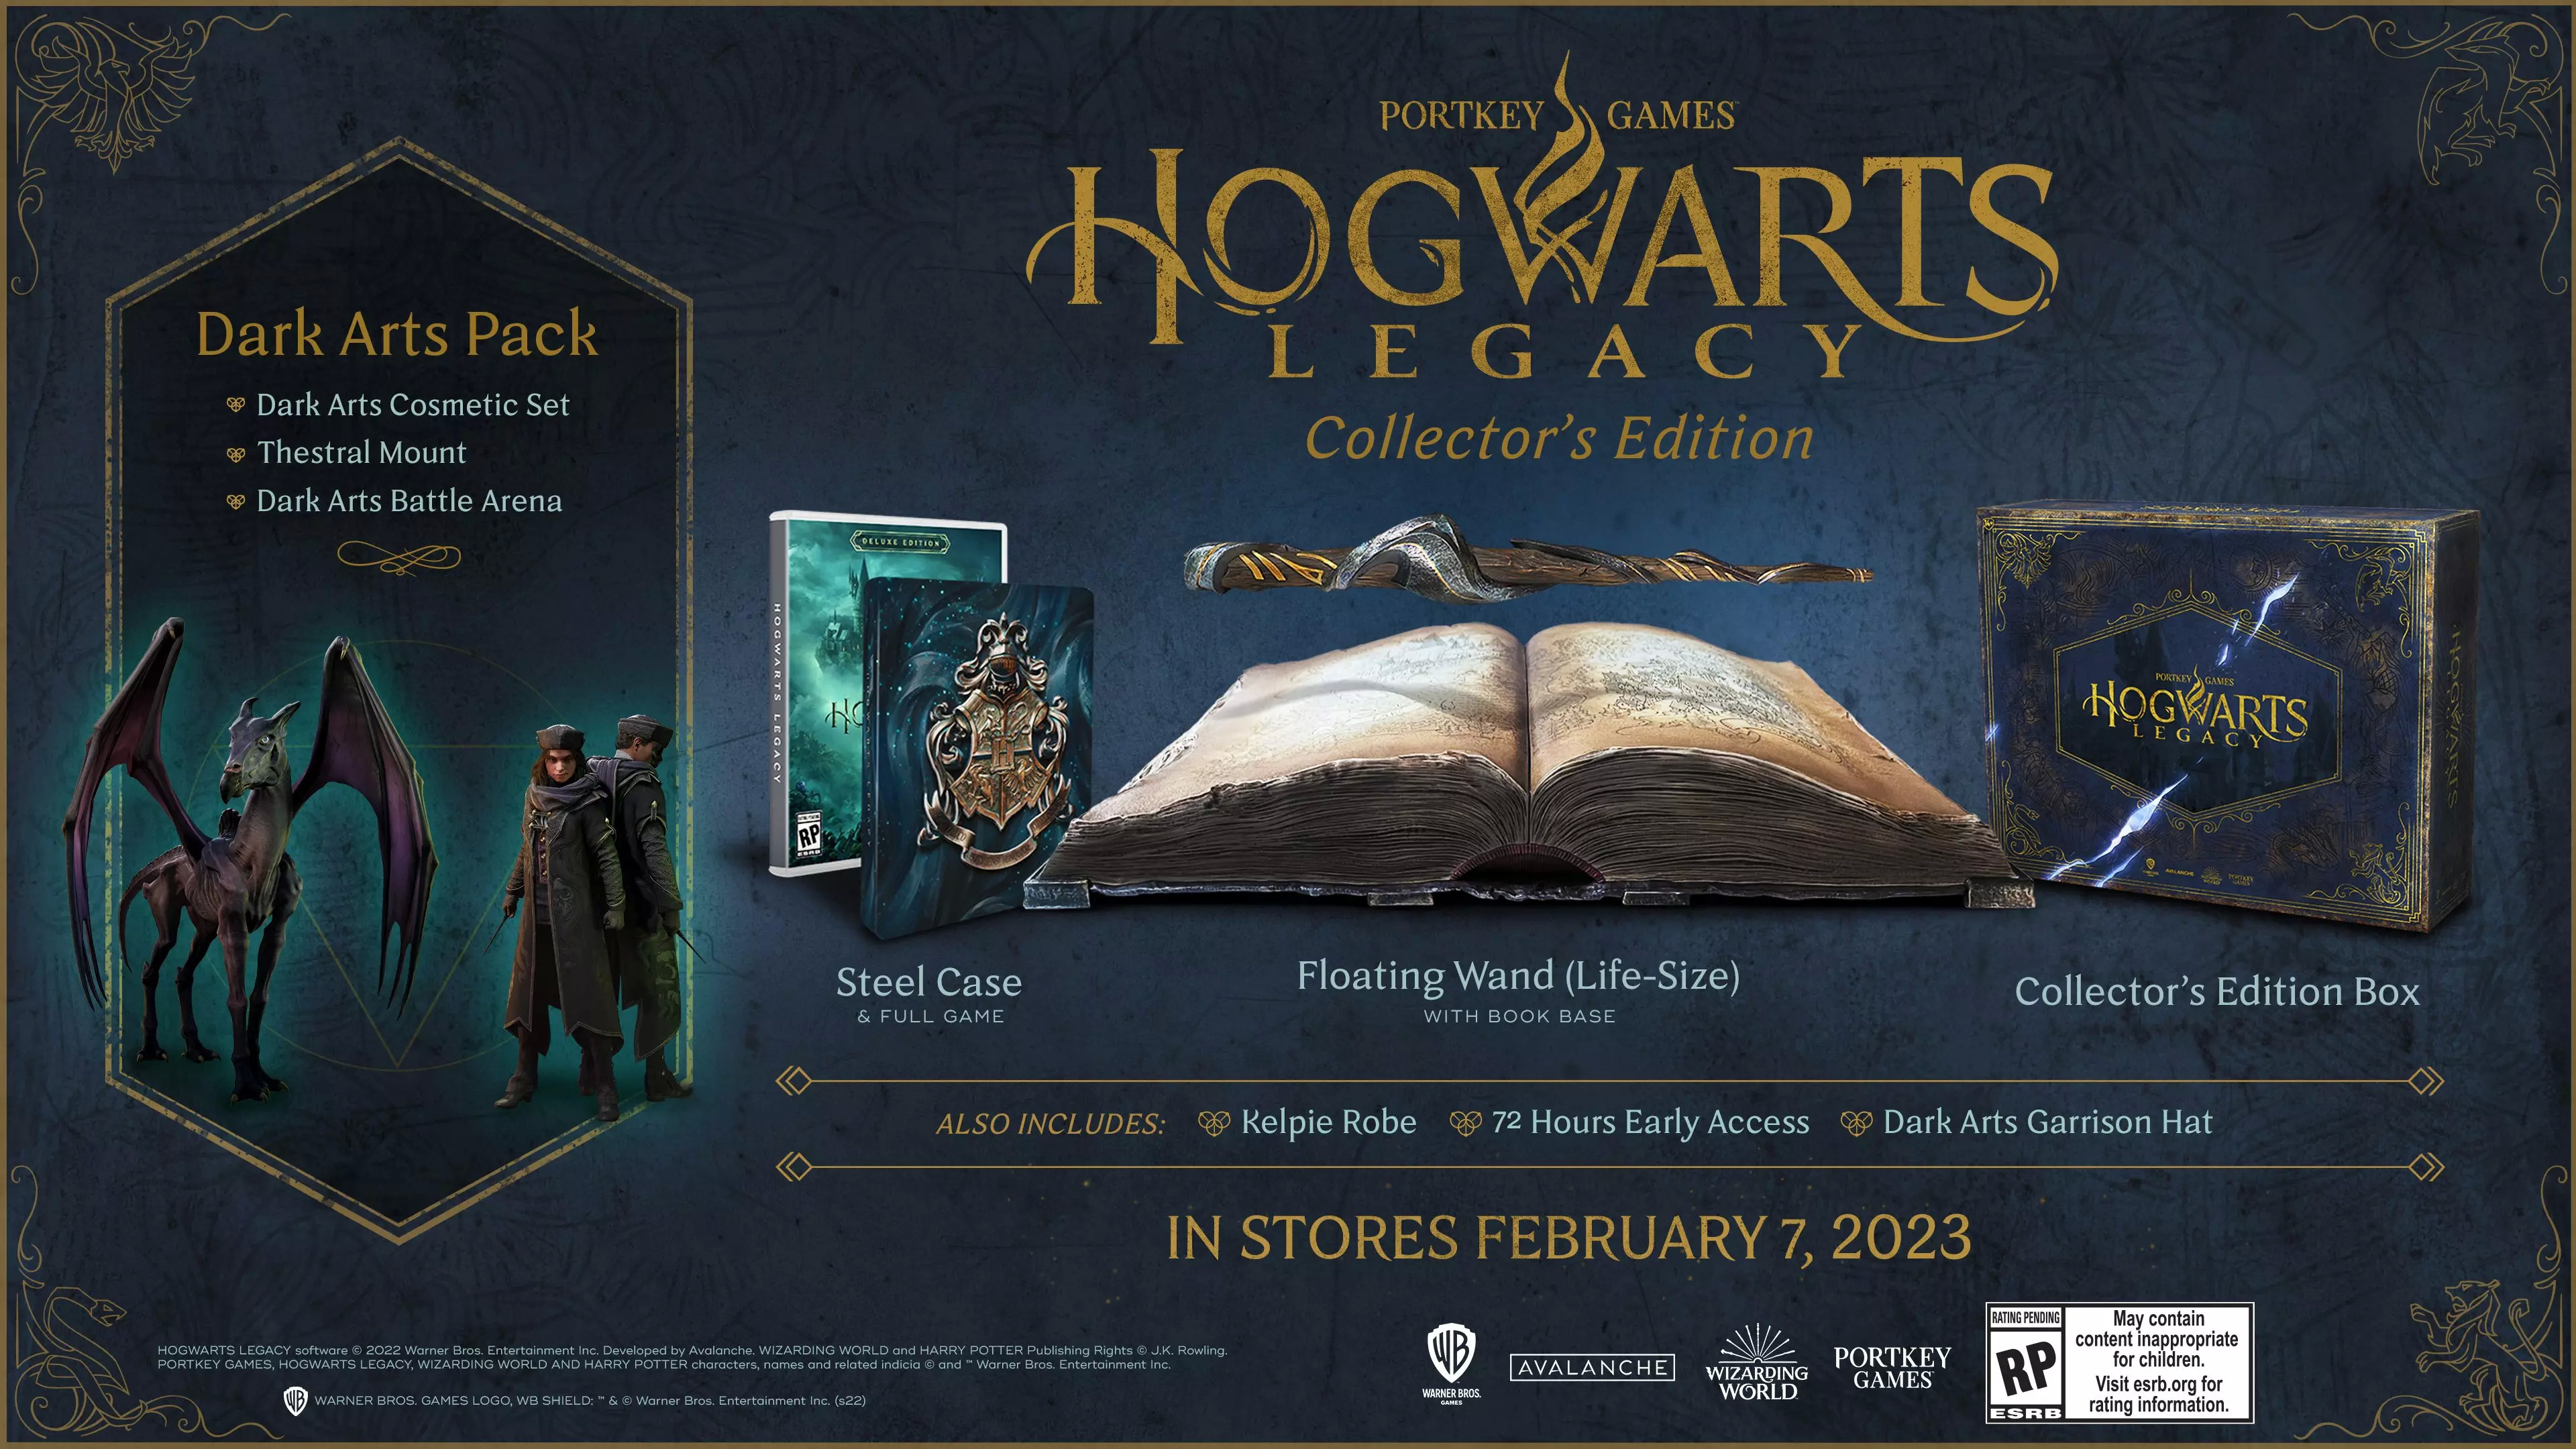 Hogwarts Legacy Collector's Edition (PC) $289.99